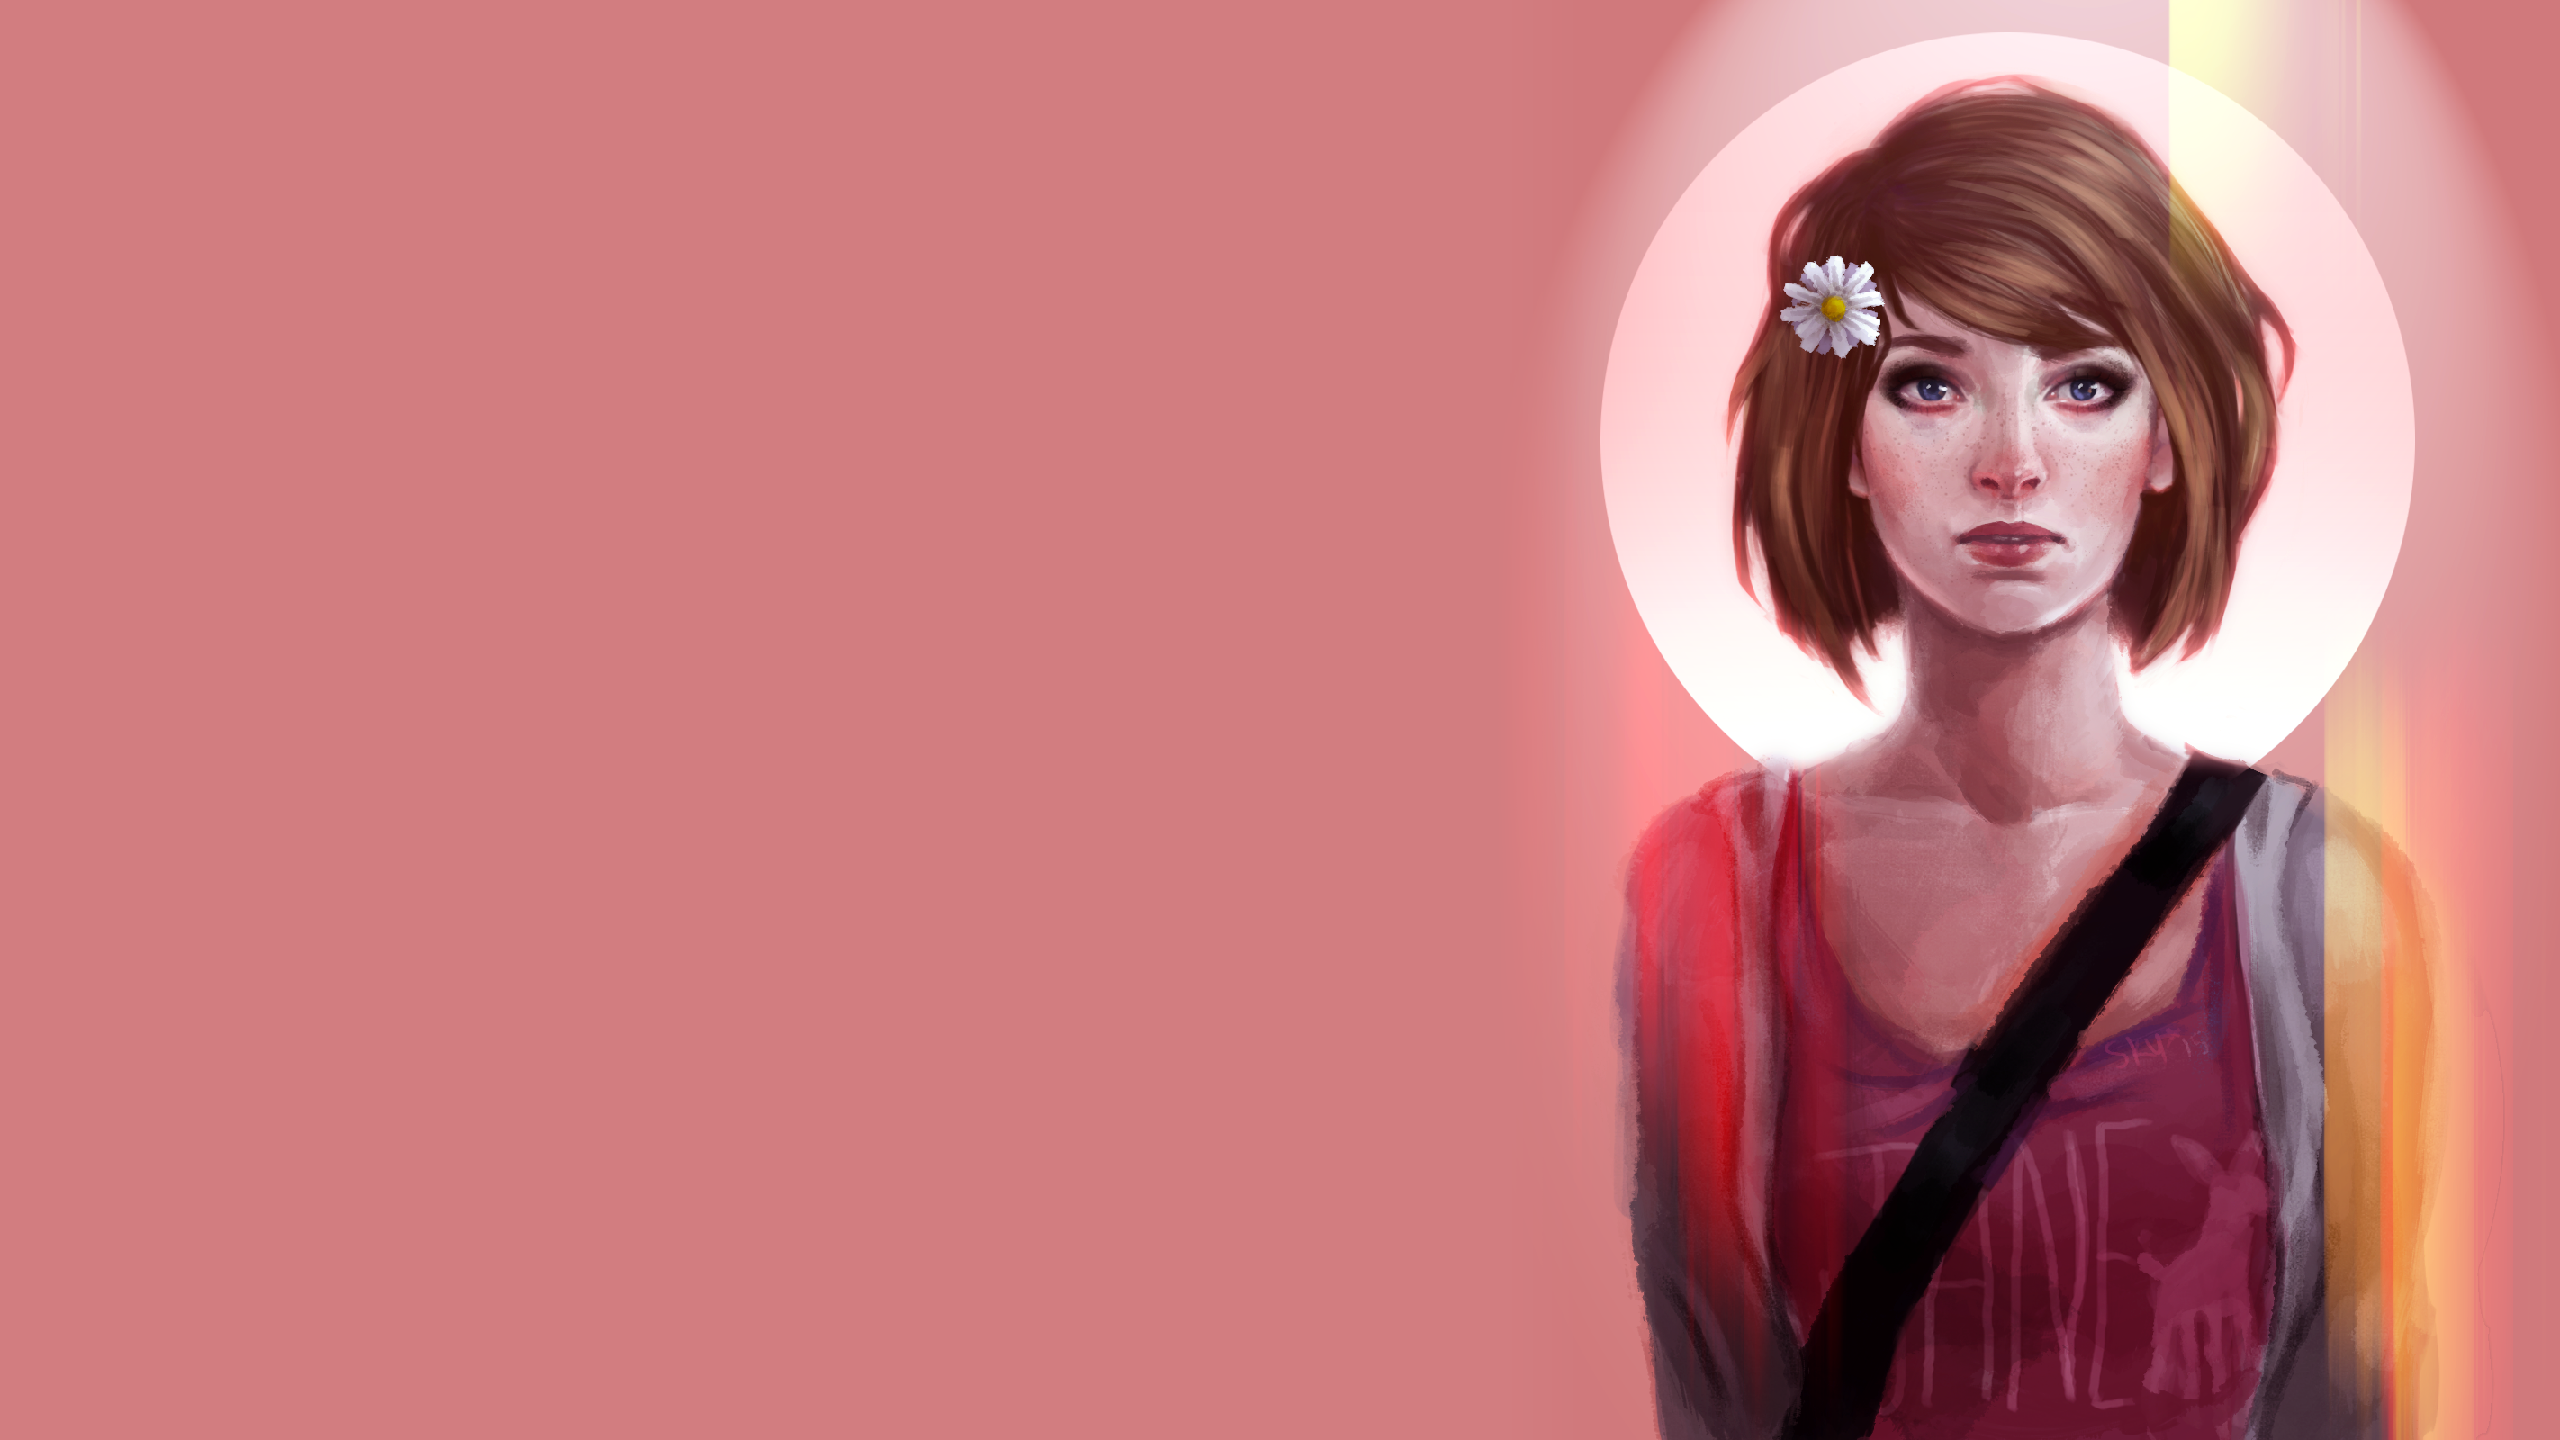 General 2560x1440 Life Is Strange video games Max Max Caulfield PC gaming video game art video game girls